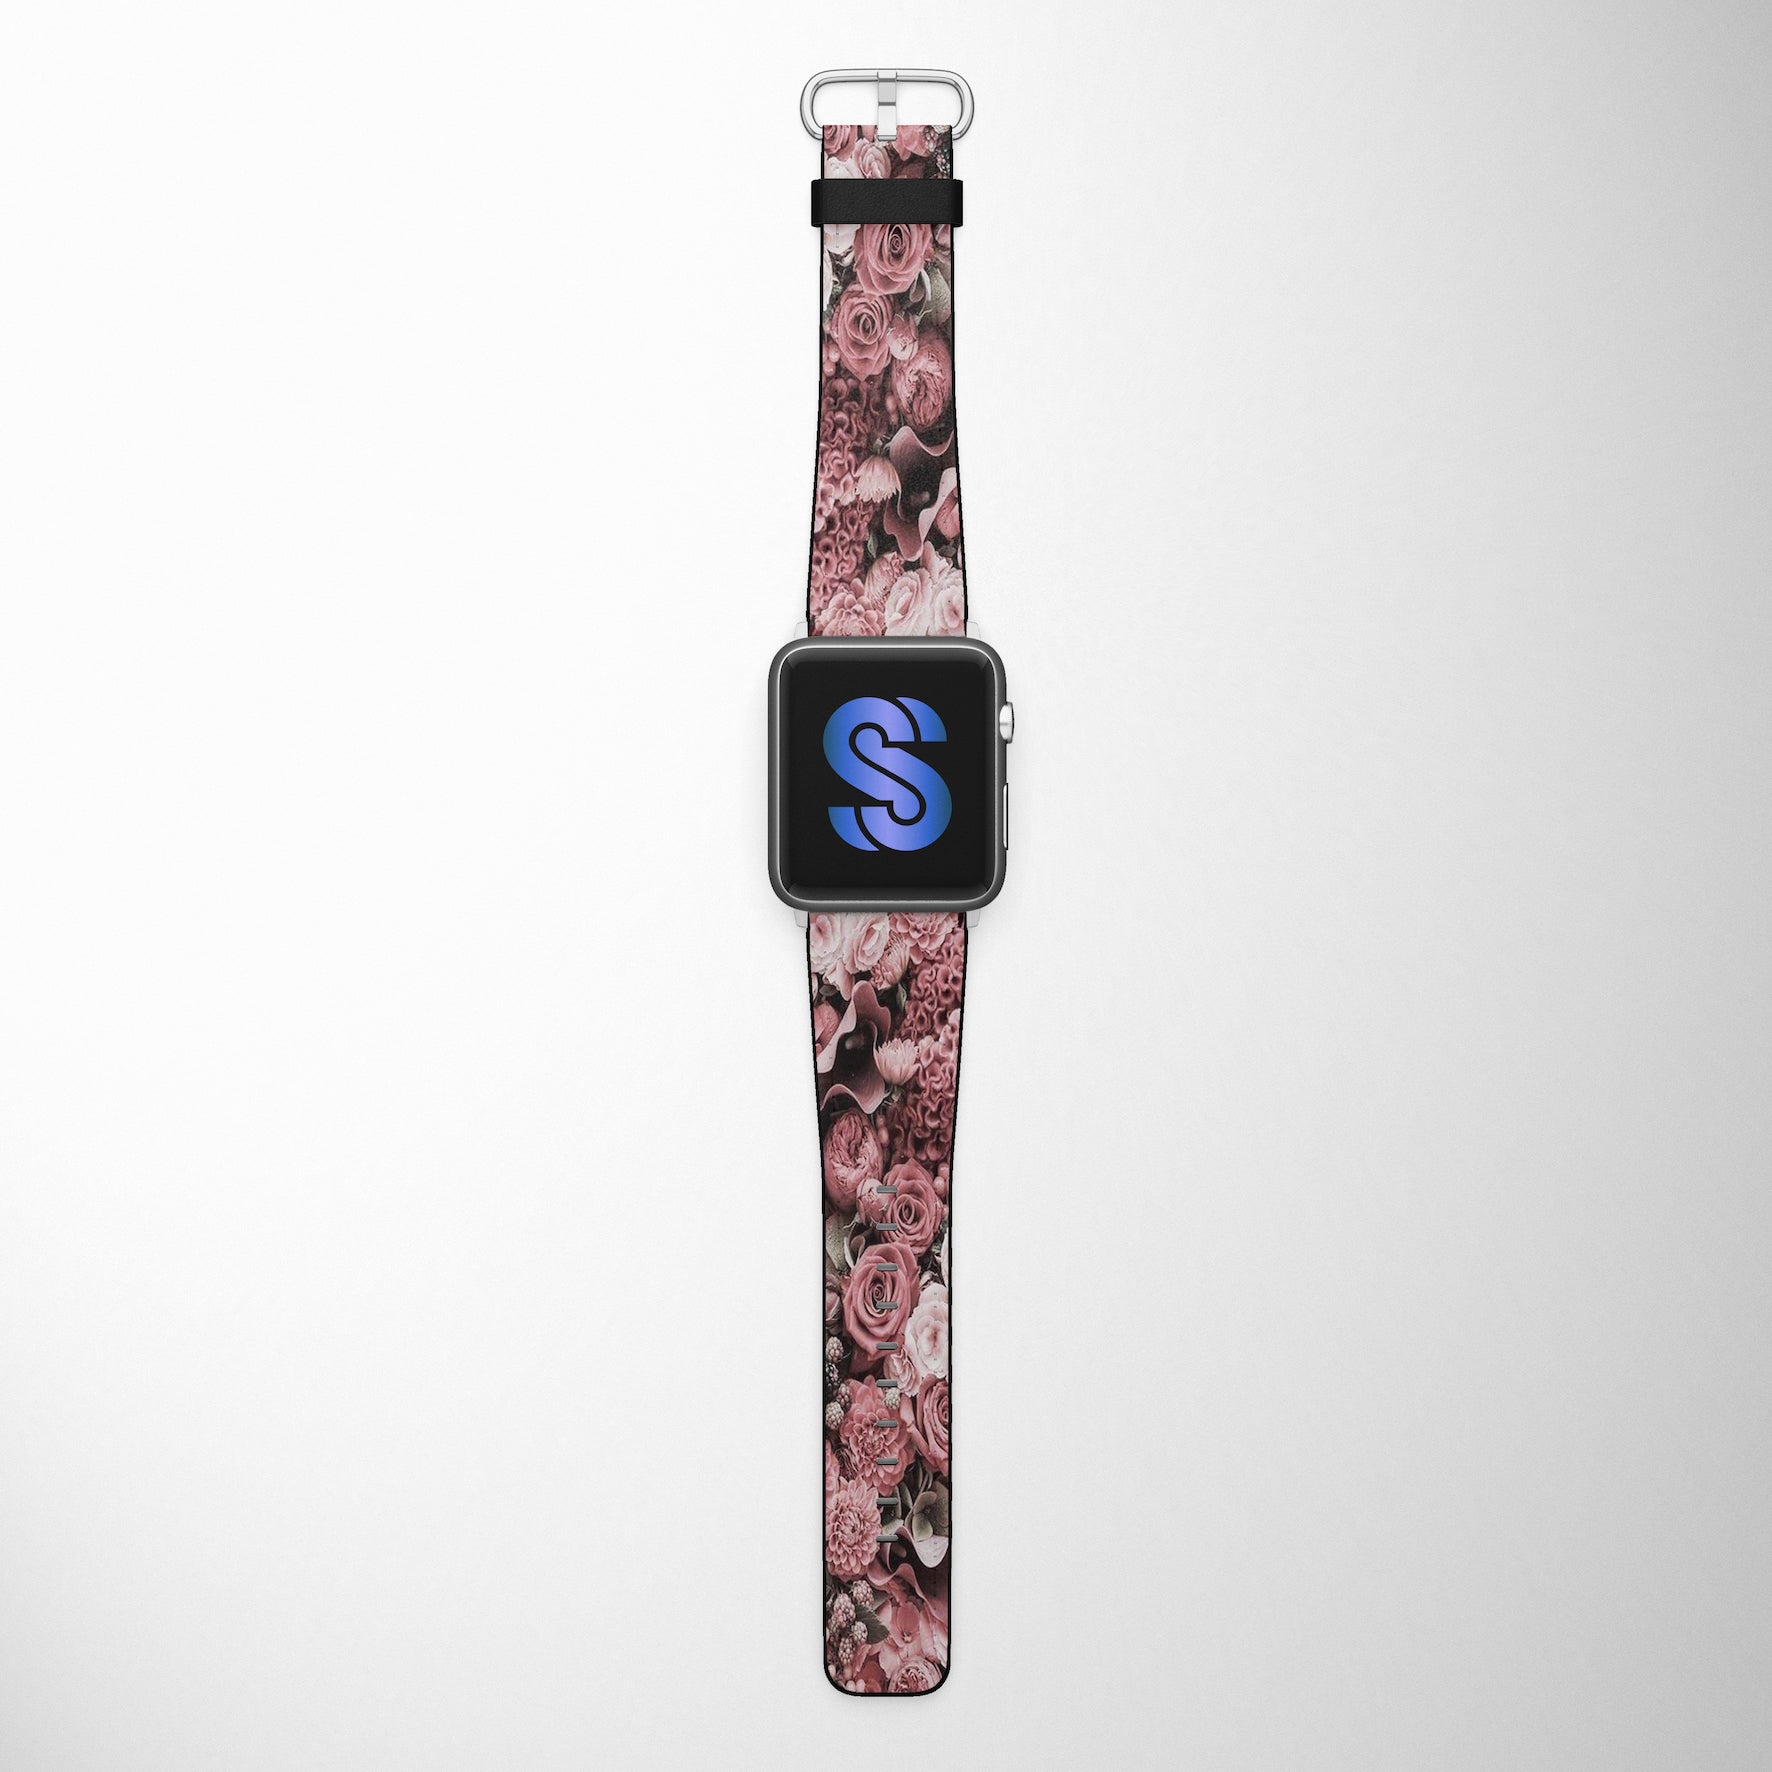 Pink & Red Roses Faux Leather Apple Watch Band for Apple Watch 1,2,3,4,5,6,SE - www.scottsy.com